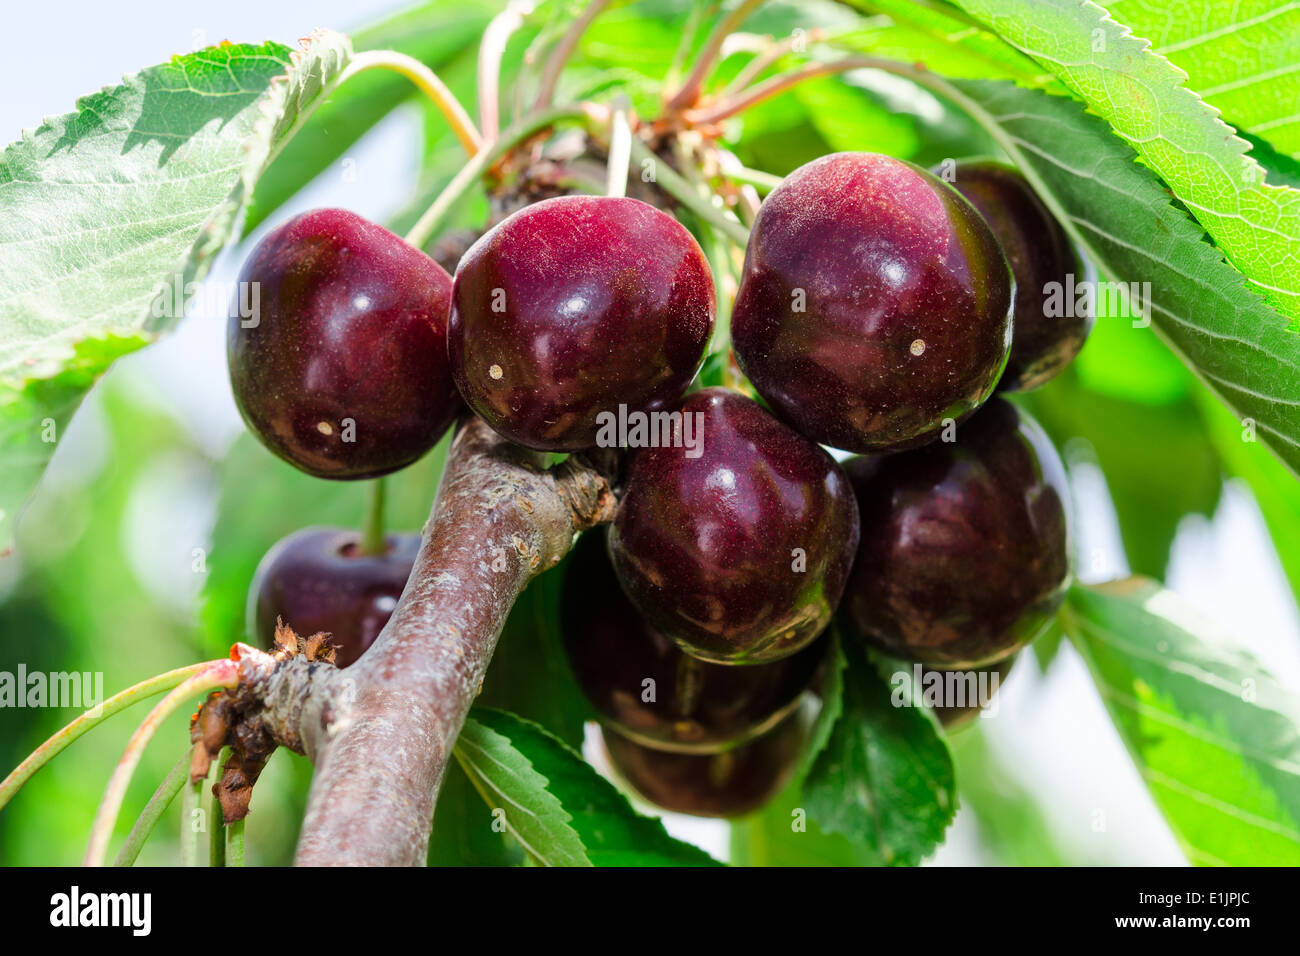 Bunches of ripe juicy cherry dark bordo berry on tree branch with sunlit leafage Stock Photo